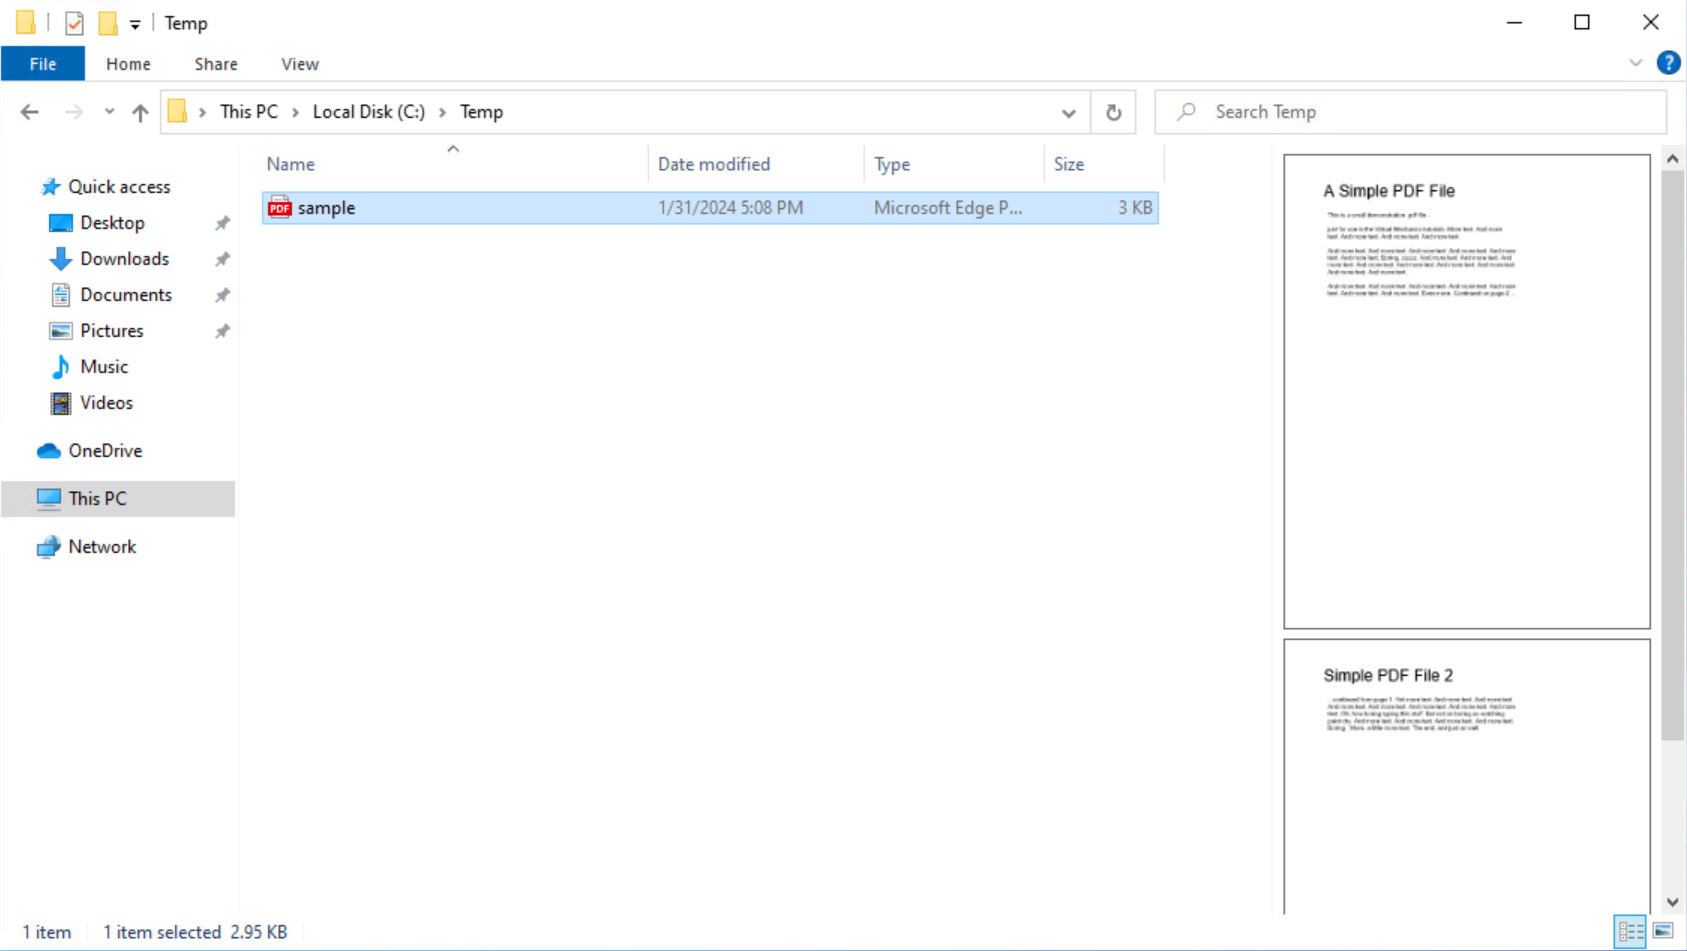 Demonstration of the File Explore Add-On tool adding a preview pane to the File Explorer